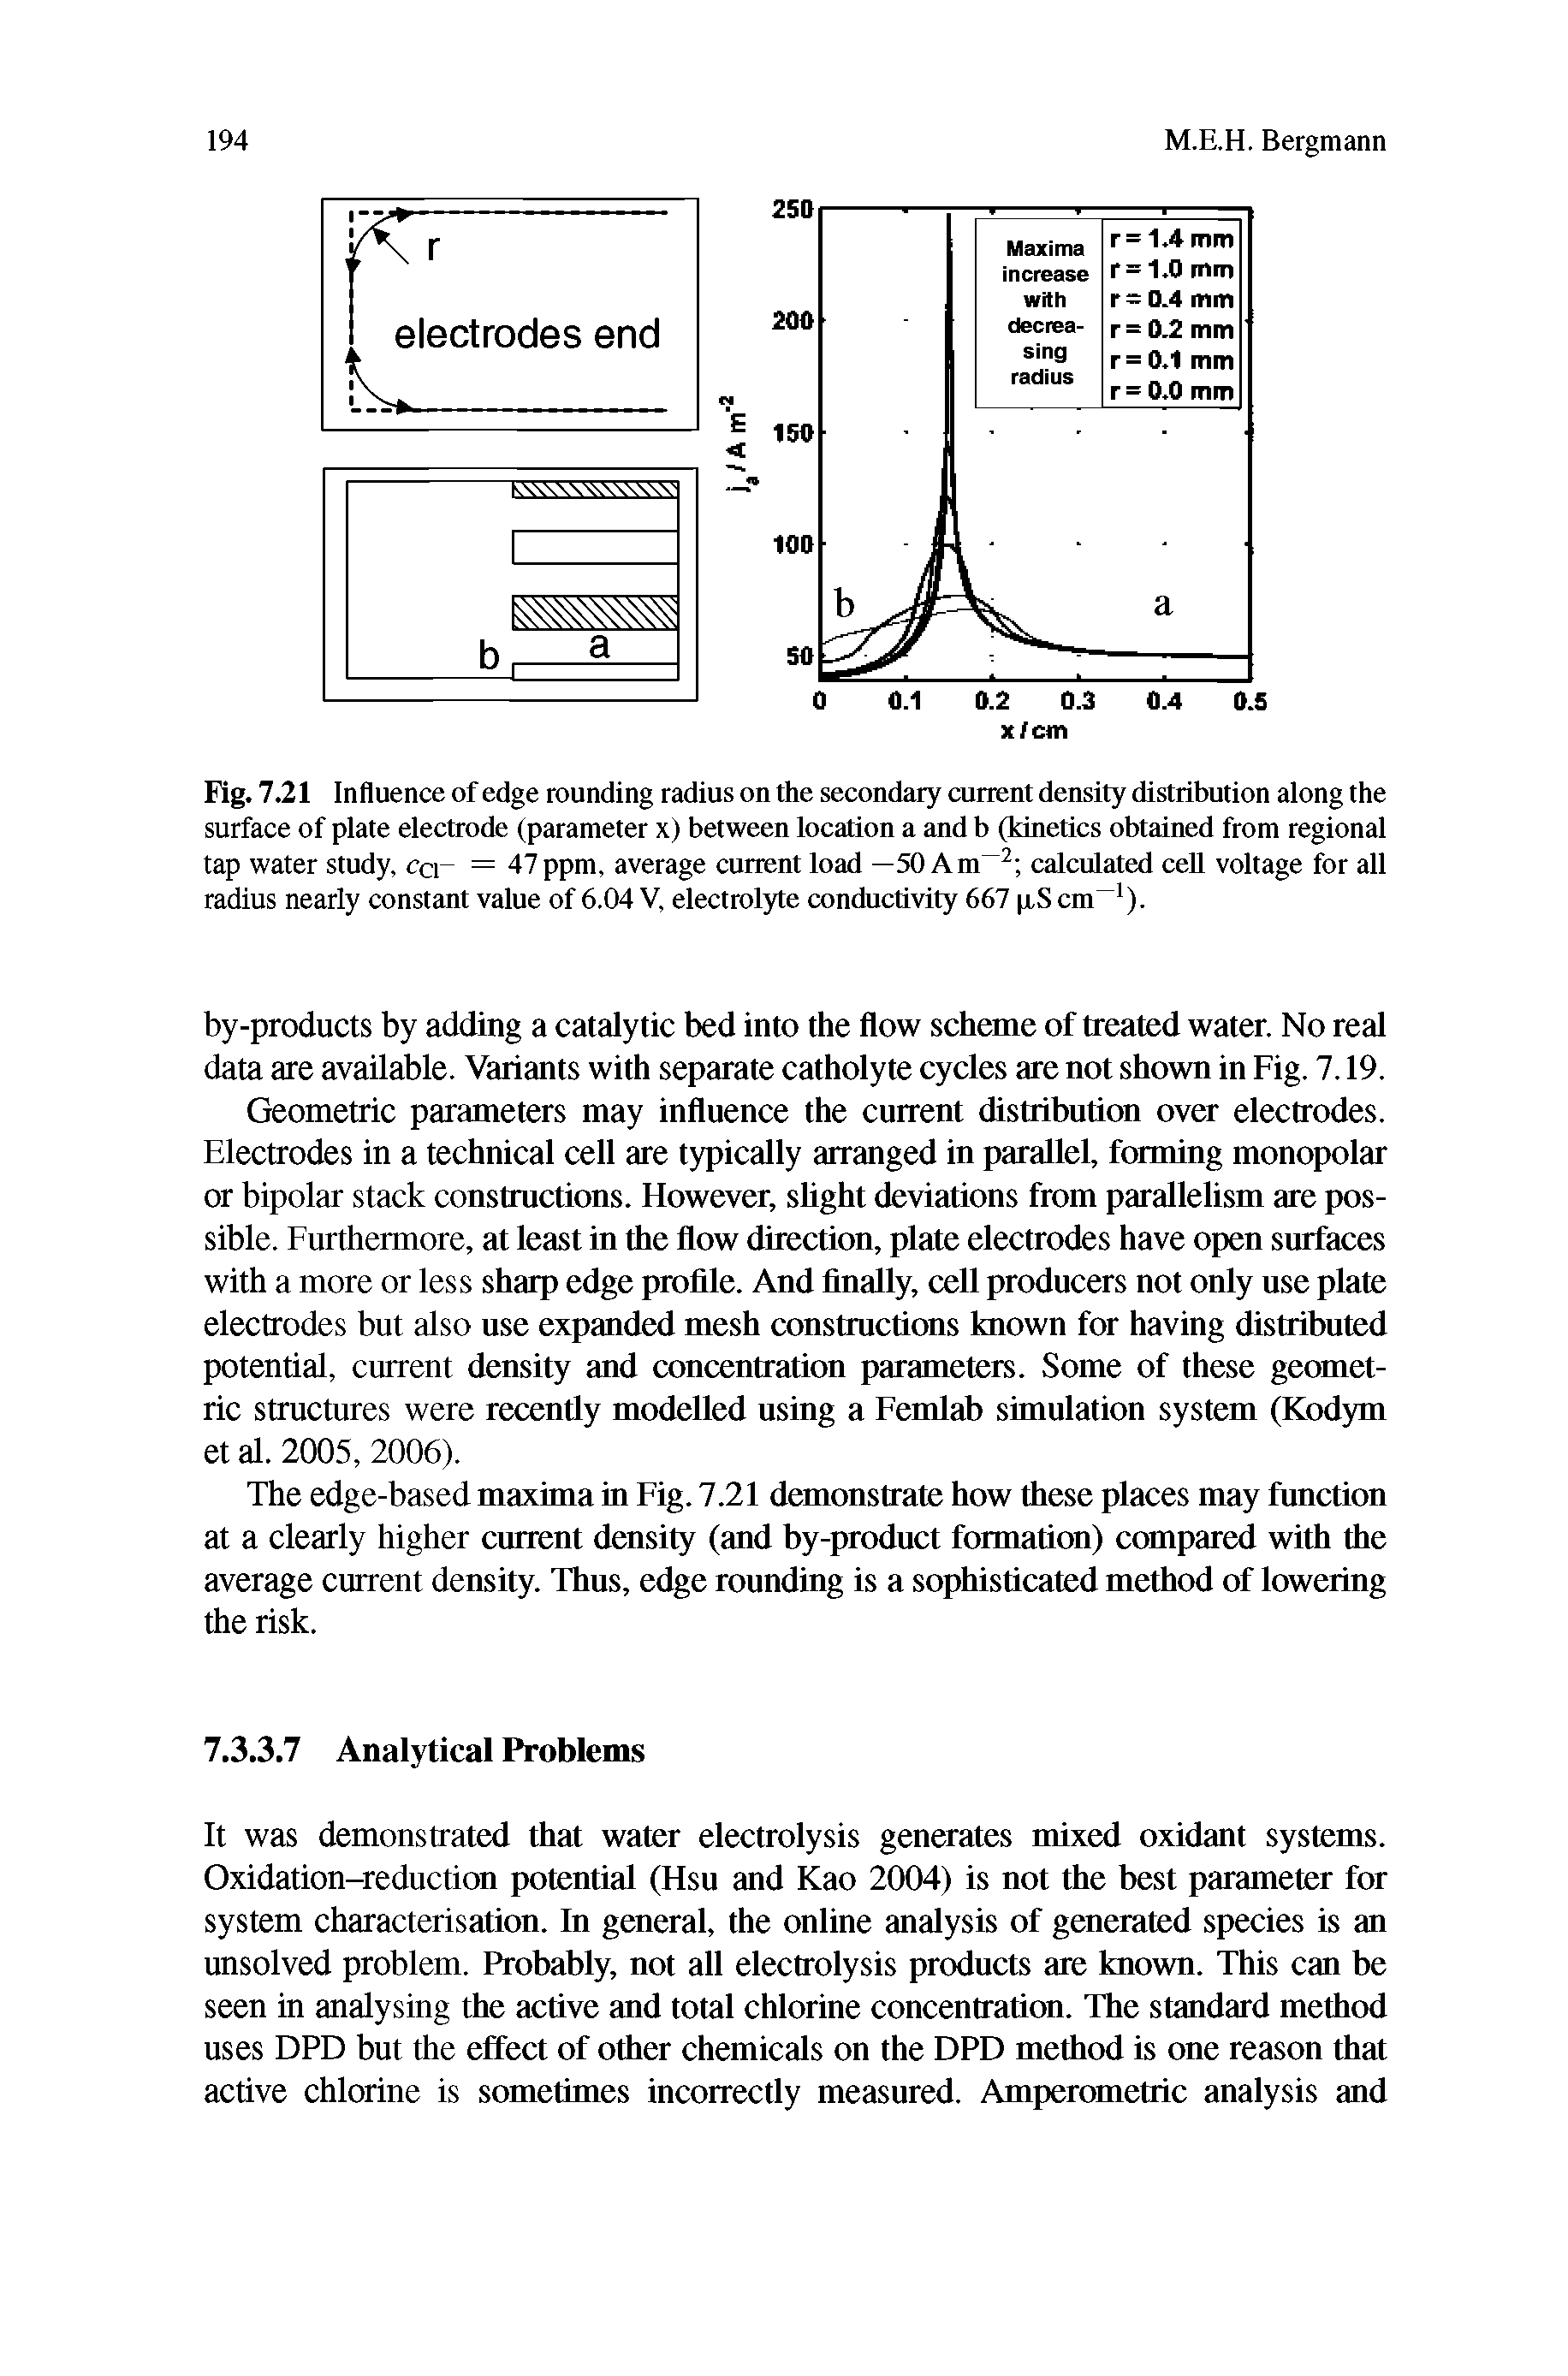 Fig. 7.21 Influence of edge rounding radius on the secondary current density distribution along the surface of plate electrode (parameter x) between location a and b (kinetics obtained from regional tap water study, cti = 47 ppm, average current load —50 A m 2 calculated cell voltage for all radius nearly constant value of 6.04 V, electrolyte conductivity 667 p,S cm-1).